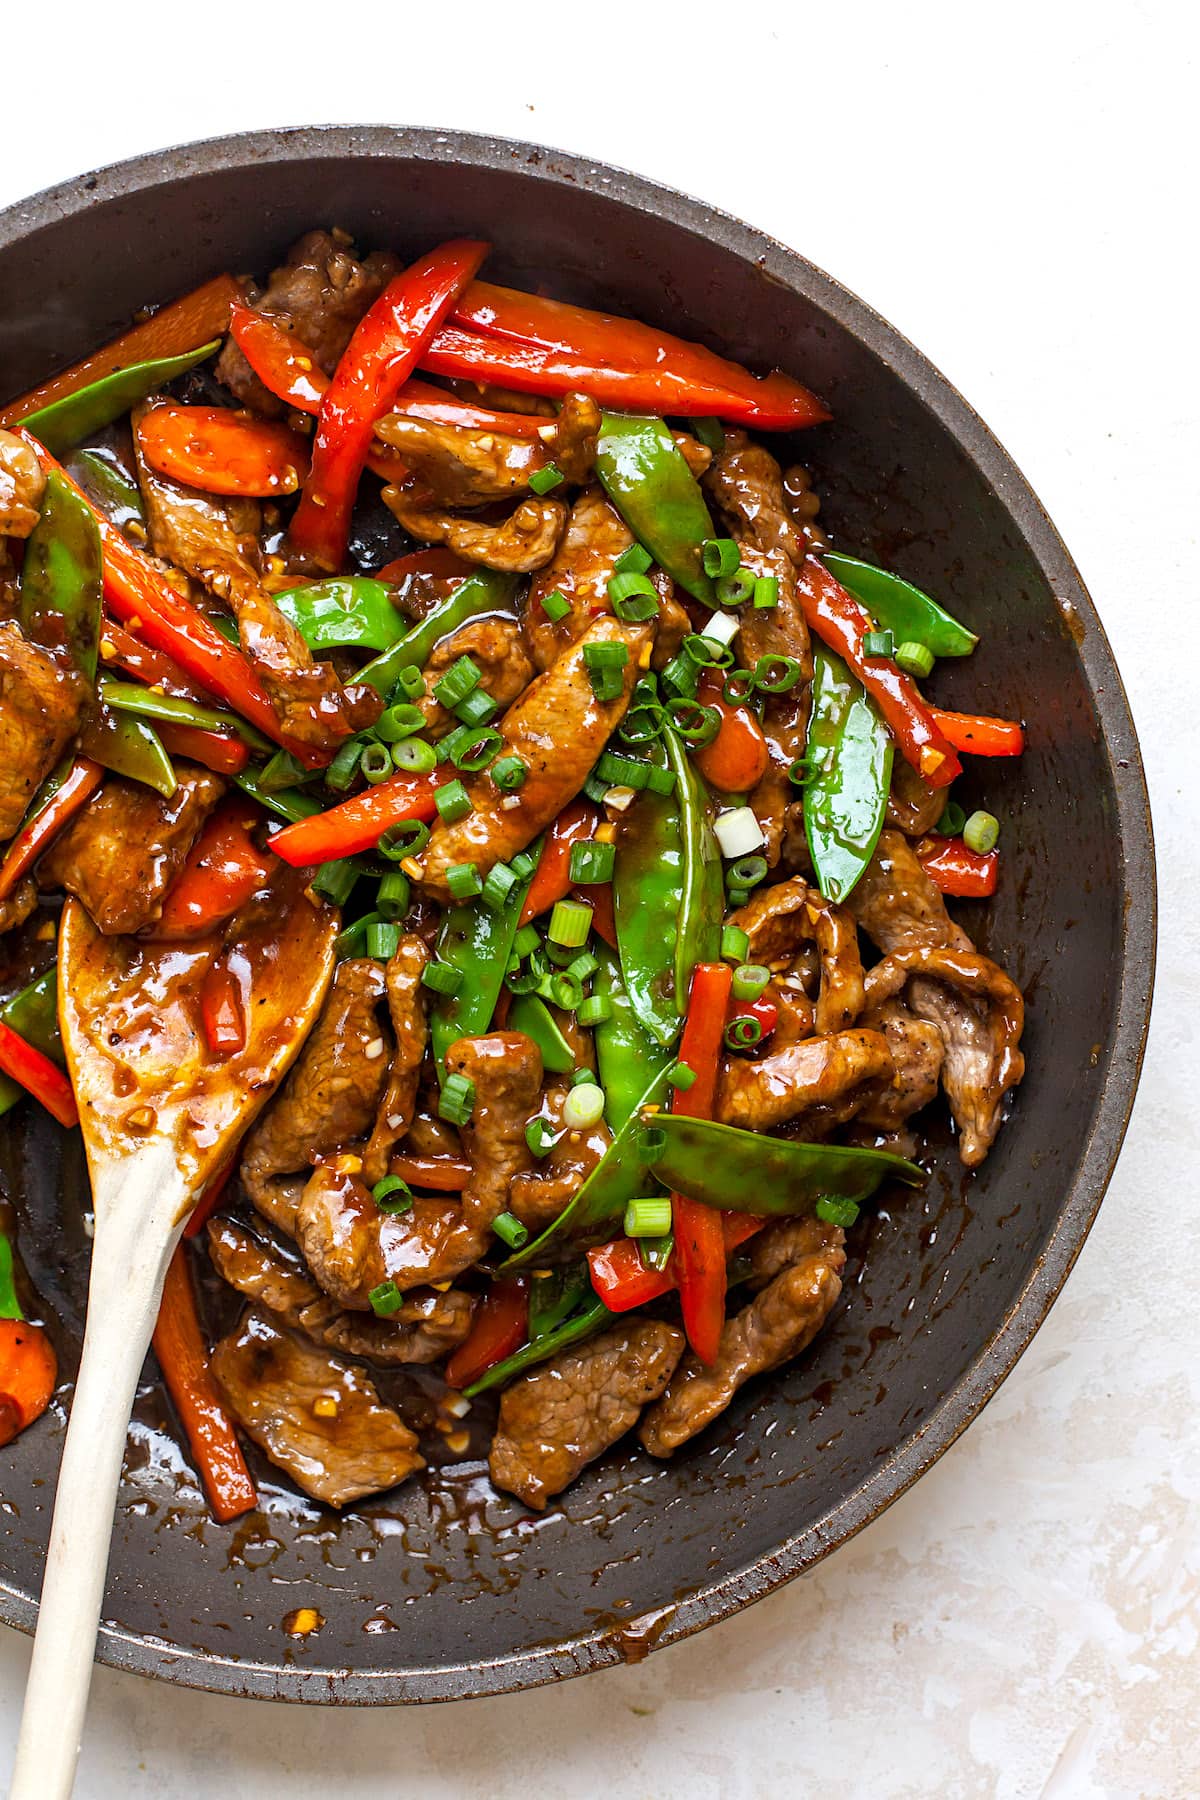 Beef stir fry with vegetables in skillet with wooden spoon. 